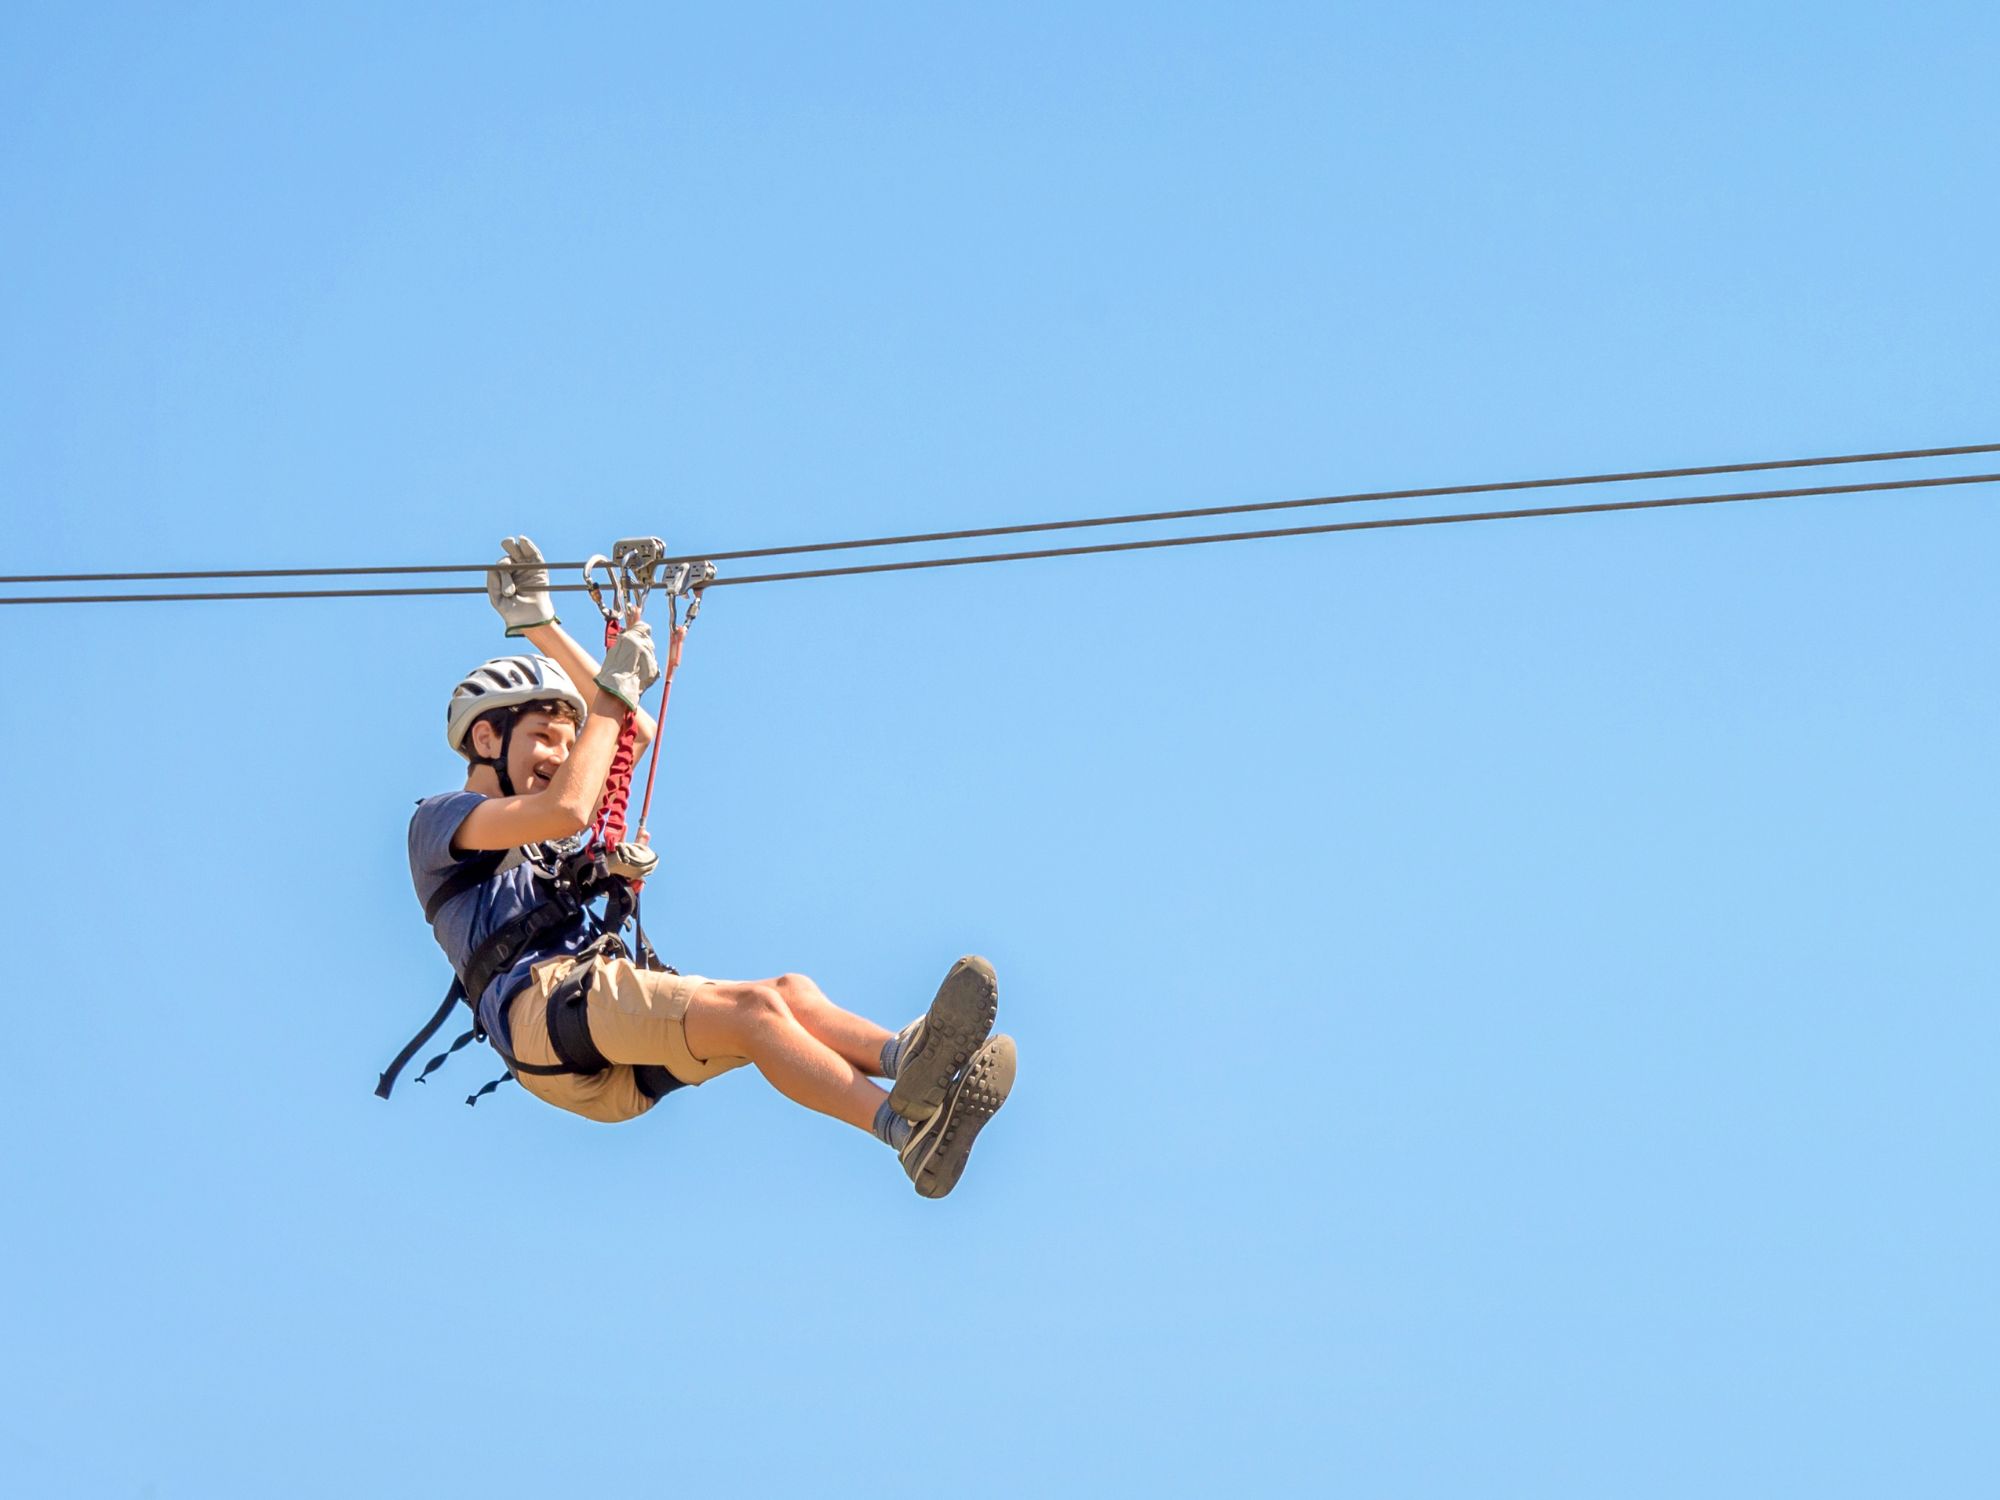 Top 5 Unique Summer Thrills To Try This Year